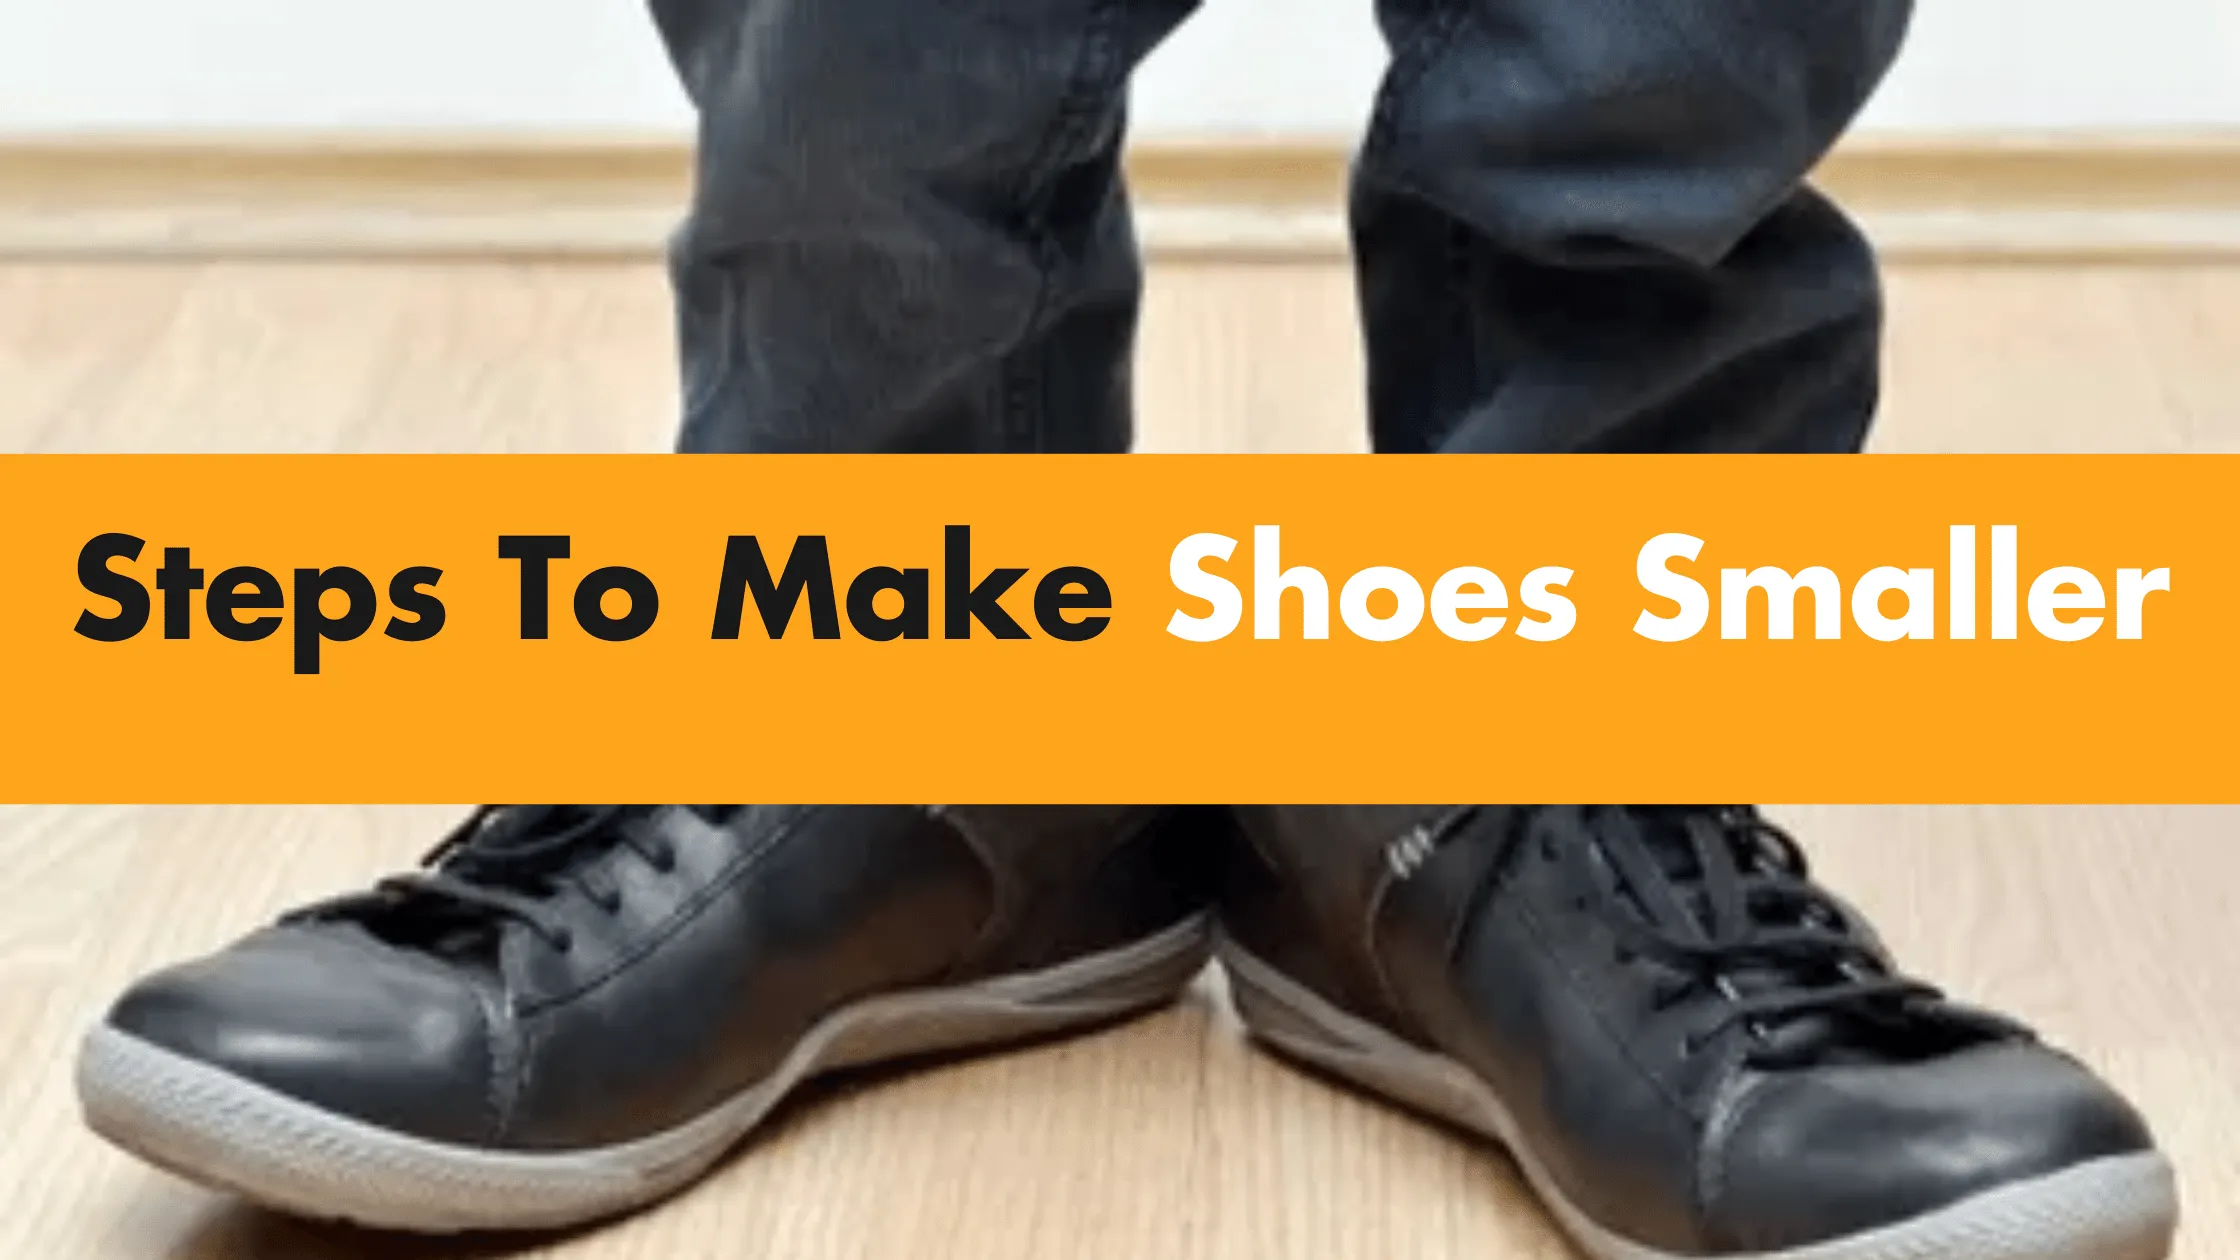 Steps To Make Shoes Smaller